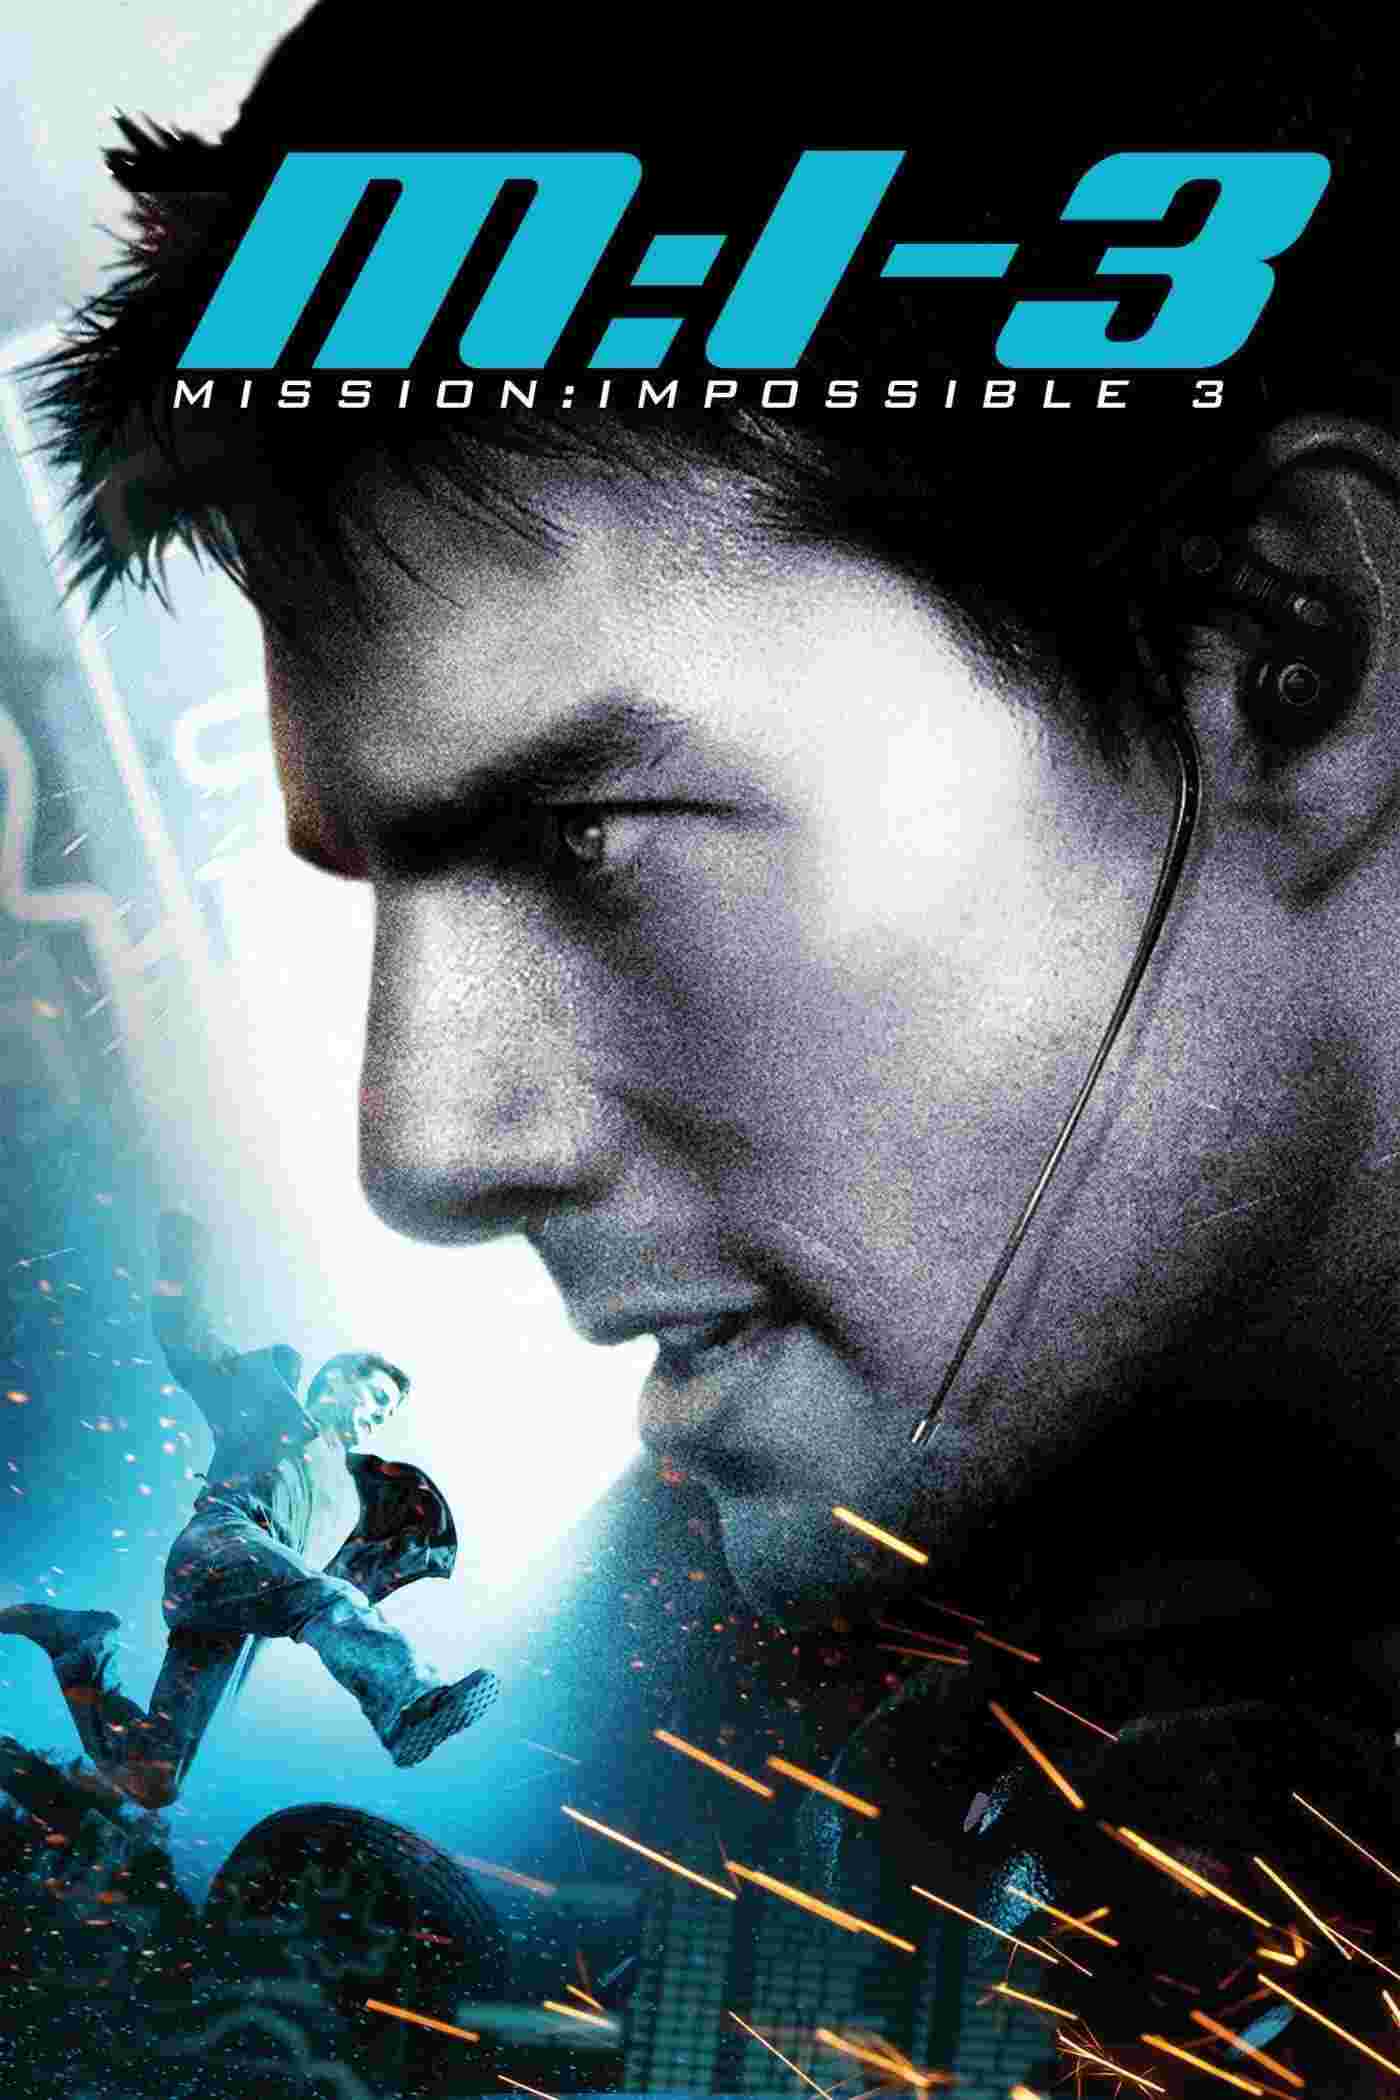 Mission: Impossible III (2006) Tom Cruise